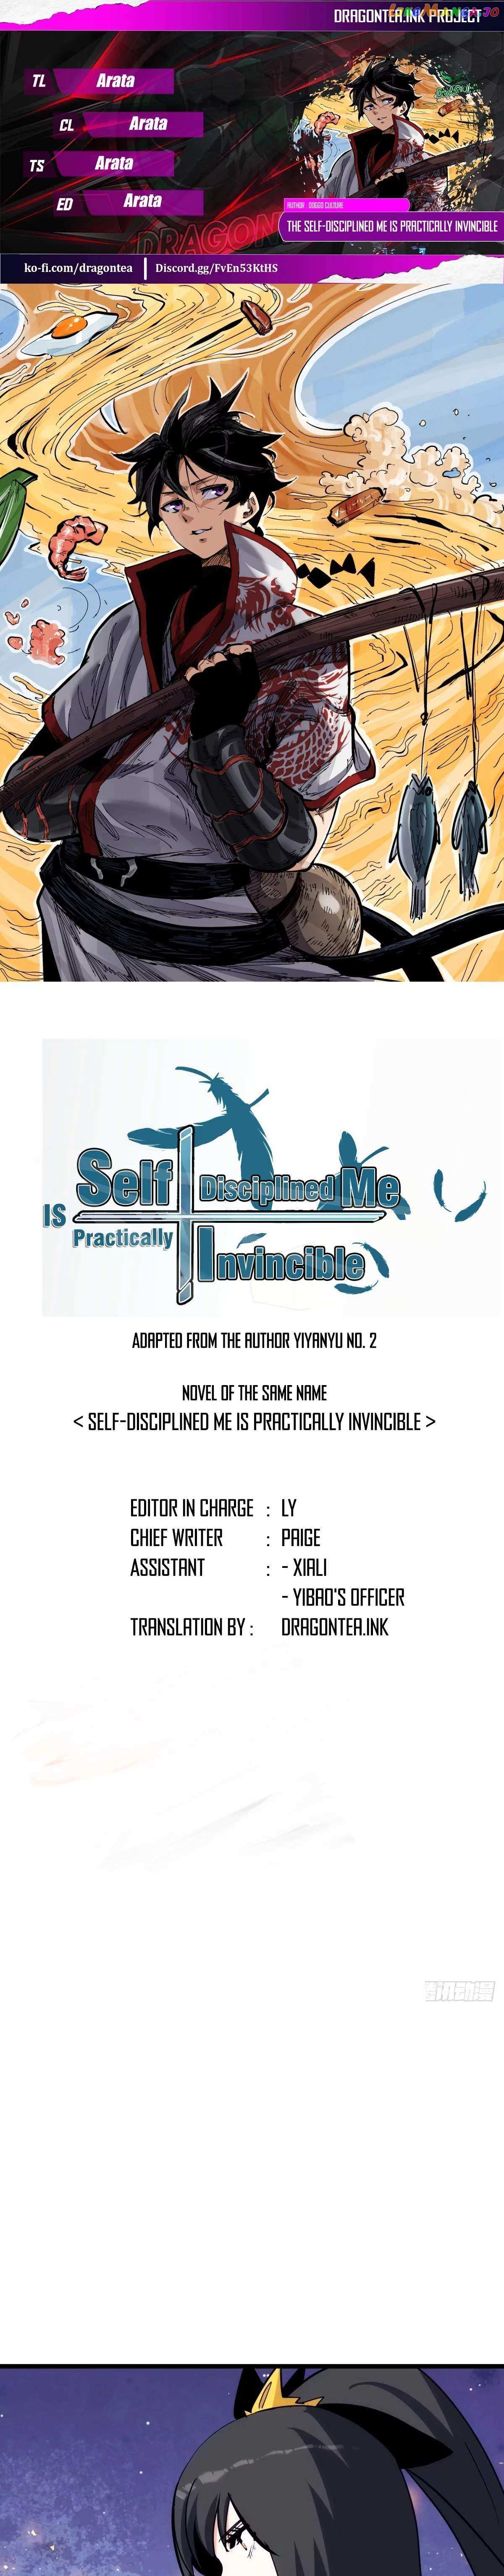 The Self-Disciplined Me Is Practically Invincible - Page 1